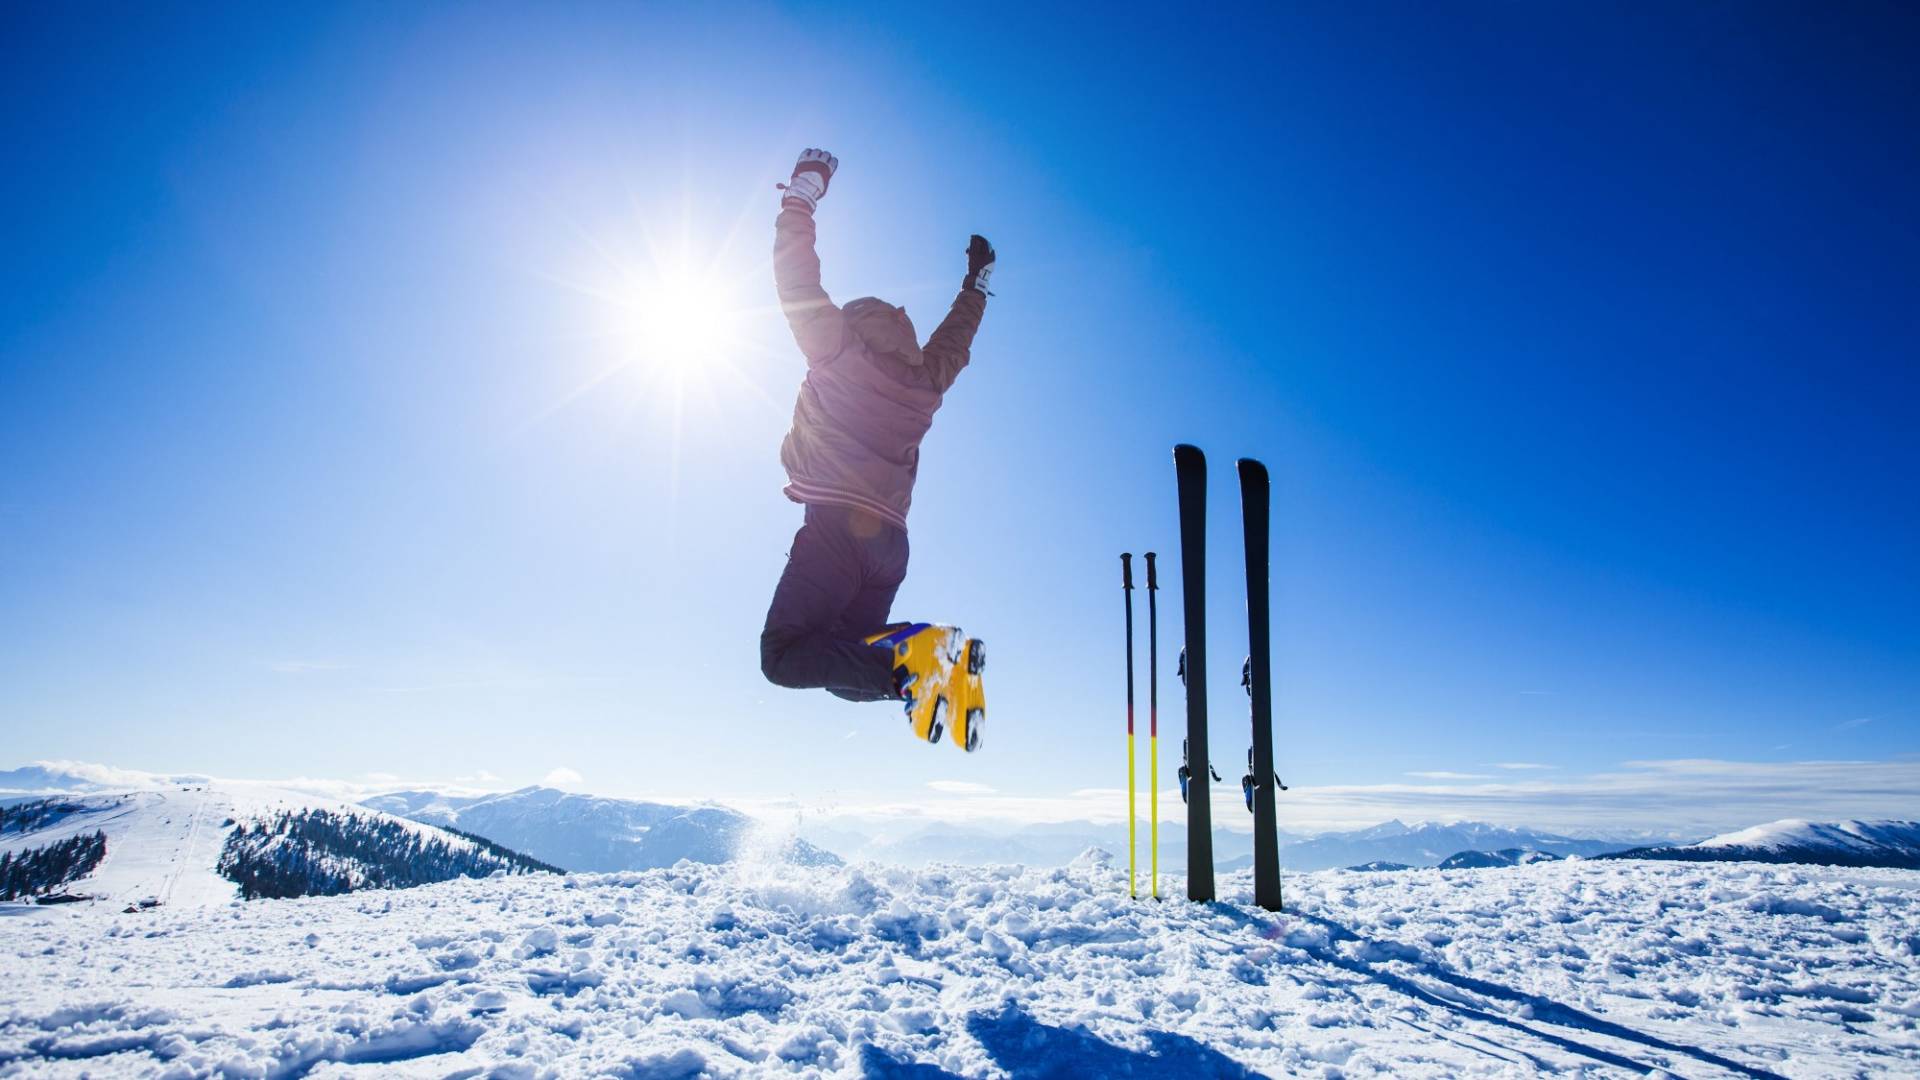 A skiier leaps into the air. Blue sky in the background and snow on the ground.